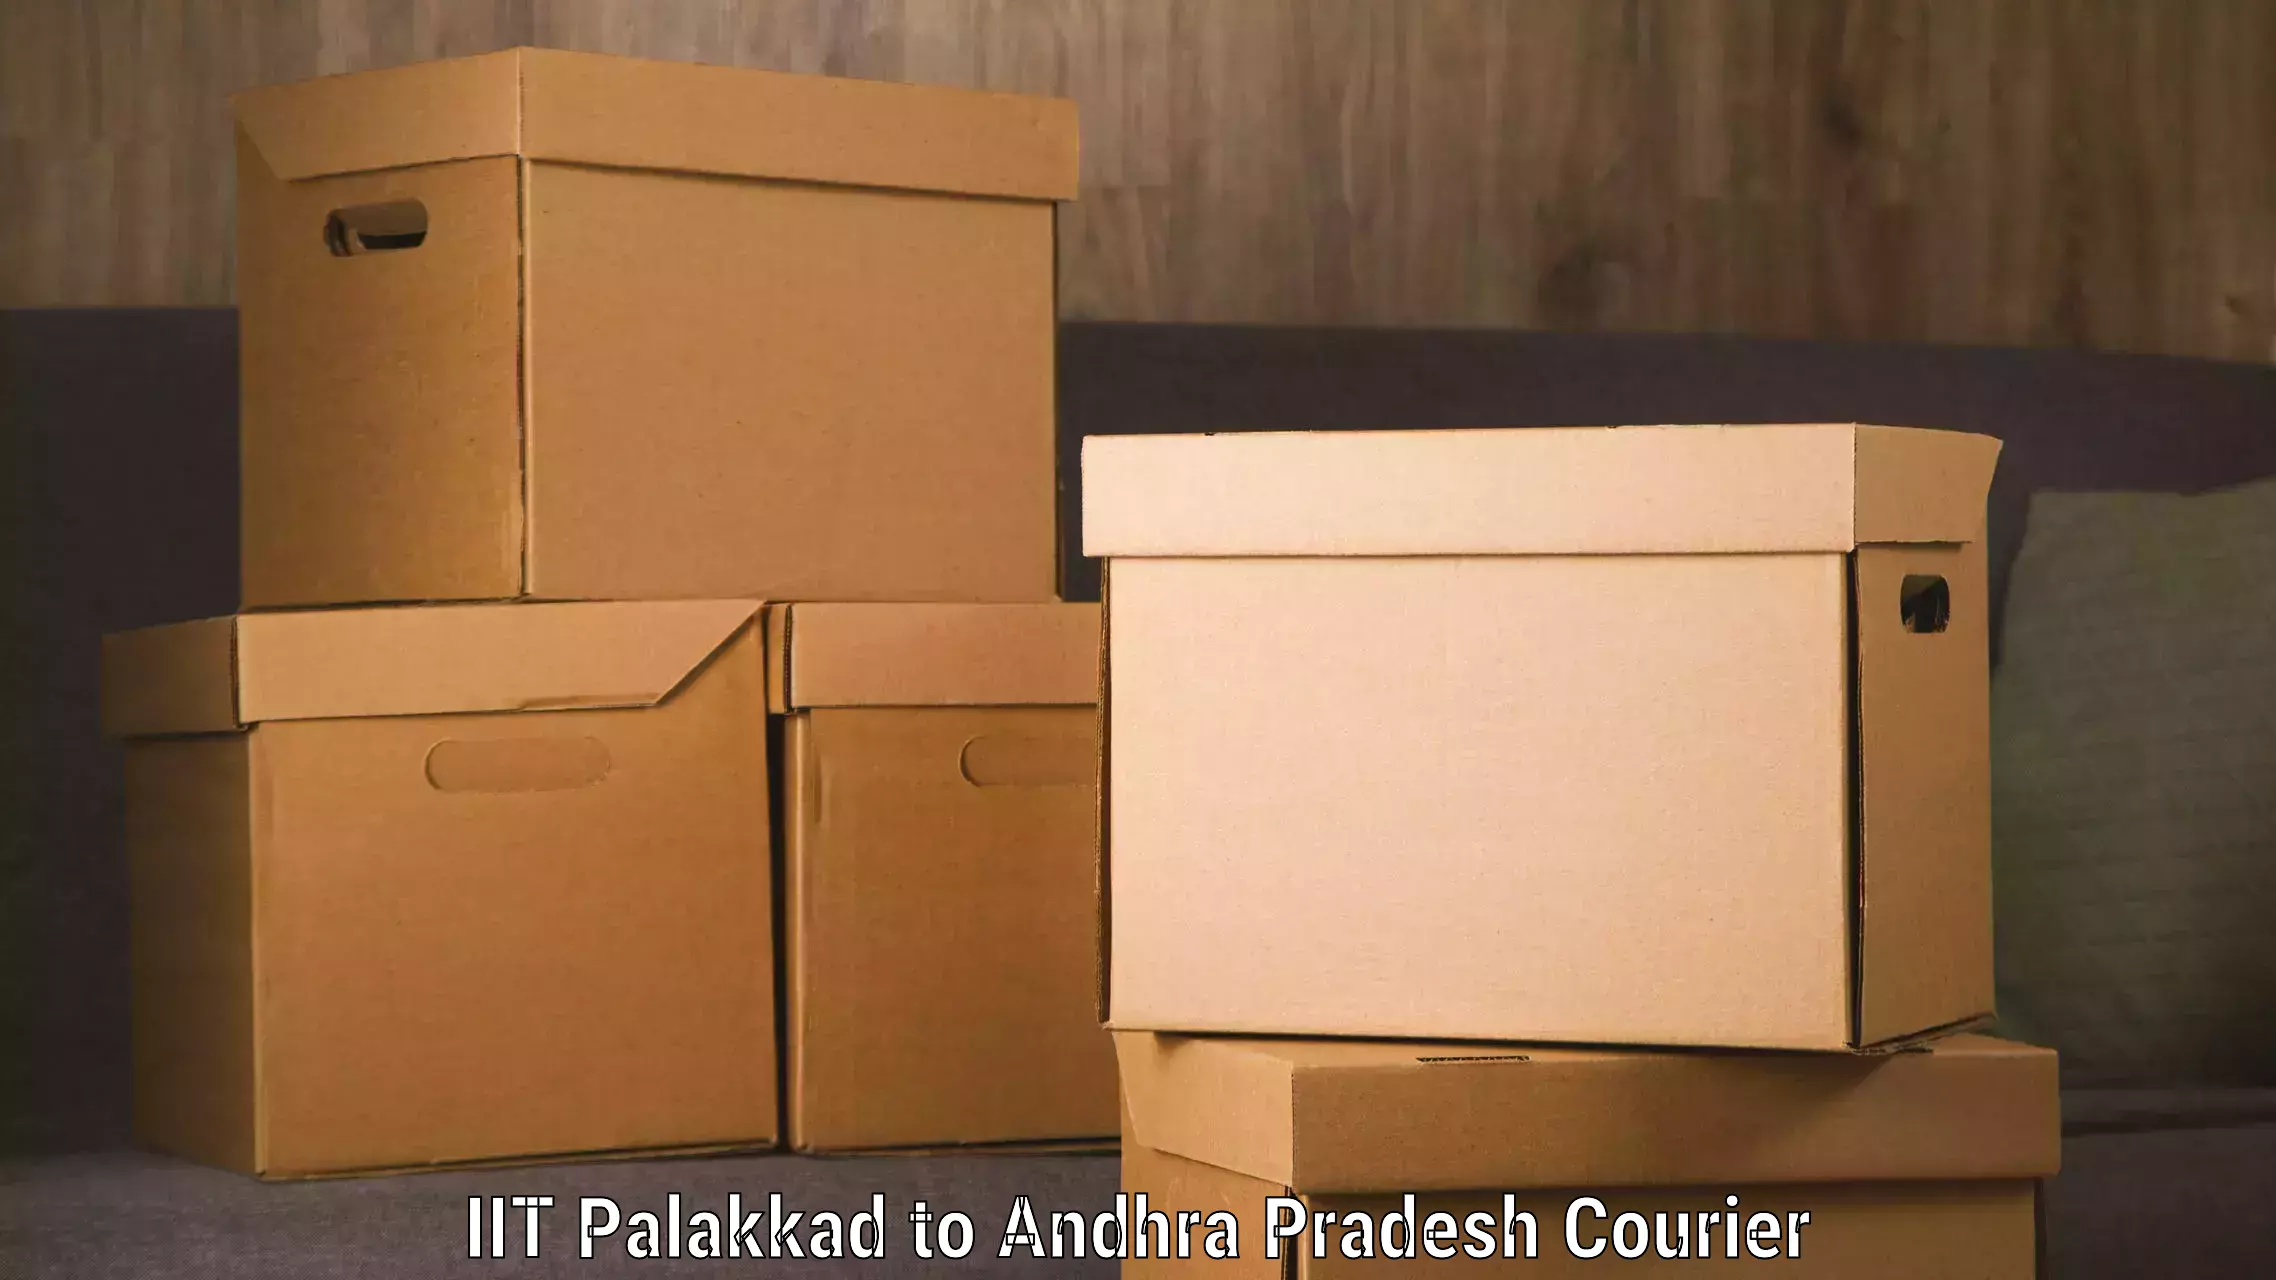 24-hour courier services IIT Palakkad to Visakhapatnam